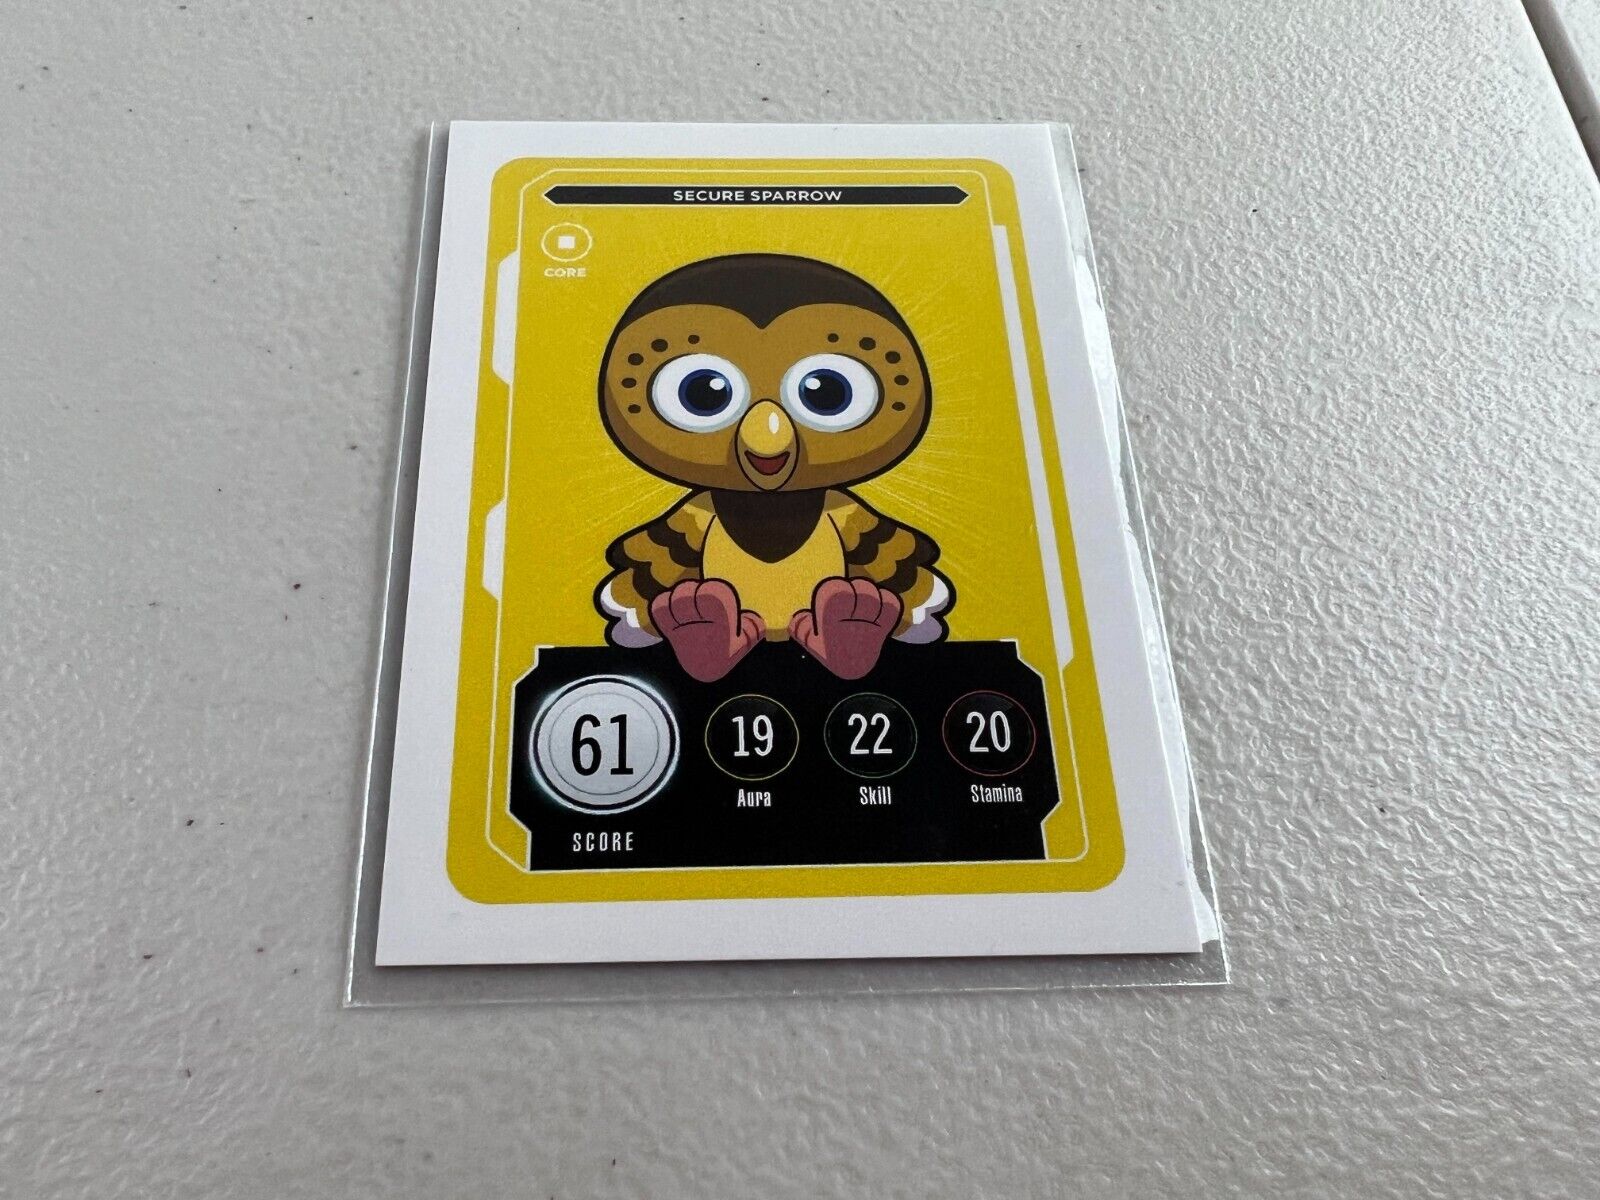 VeeFriends Secure Sparrow Series 2 Core Card Compete and Collect Gary Vee